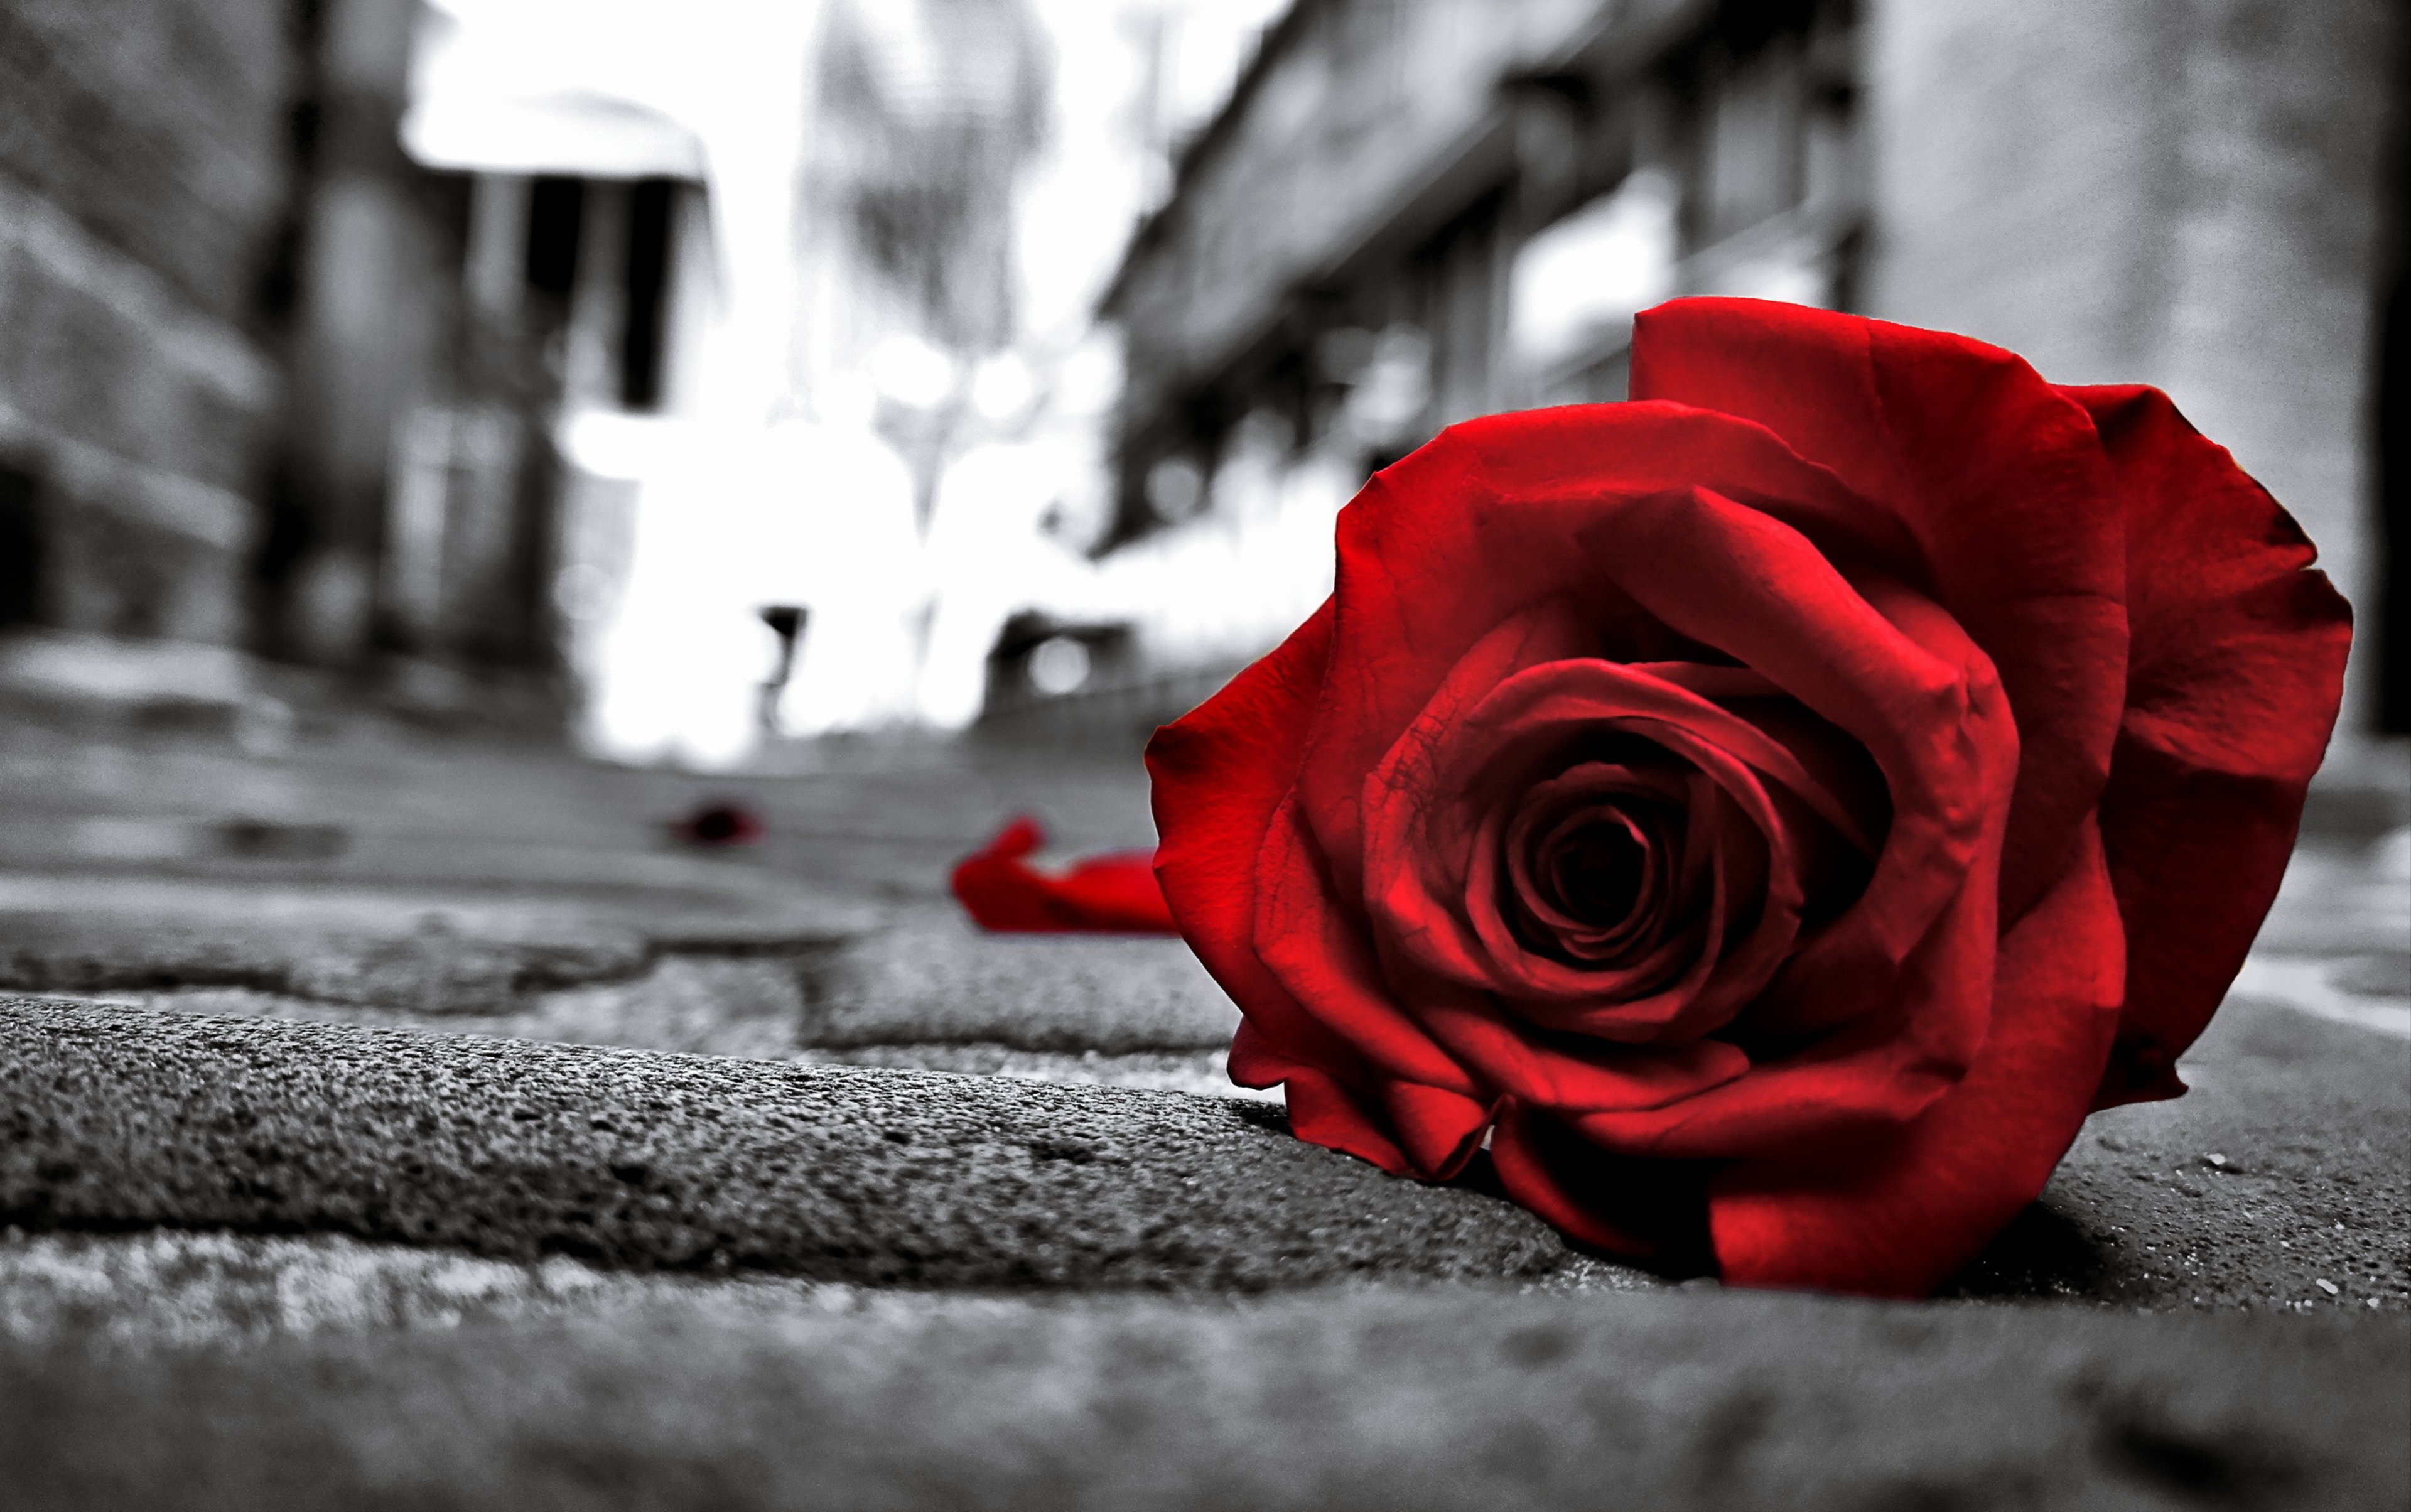 rose, Sad, Black, Lost, Love, Emotions, Flowers, Life, Road, Floor, Lonely  Wallpapers HD / Desktop and Mobile Backgrounds